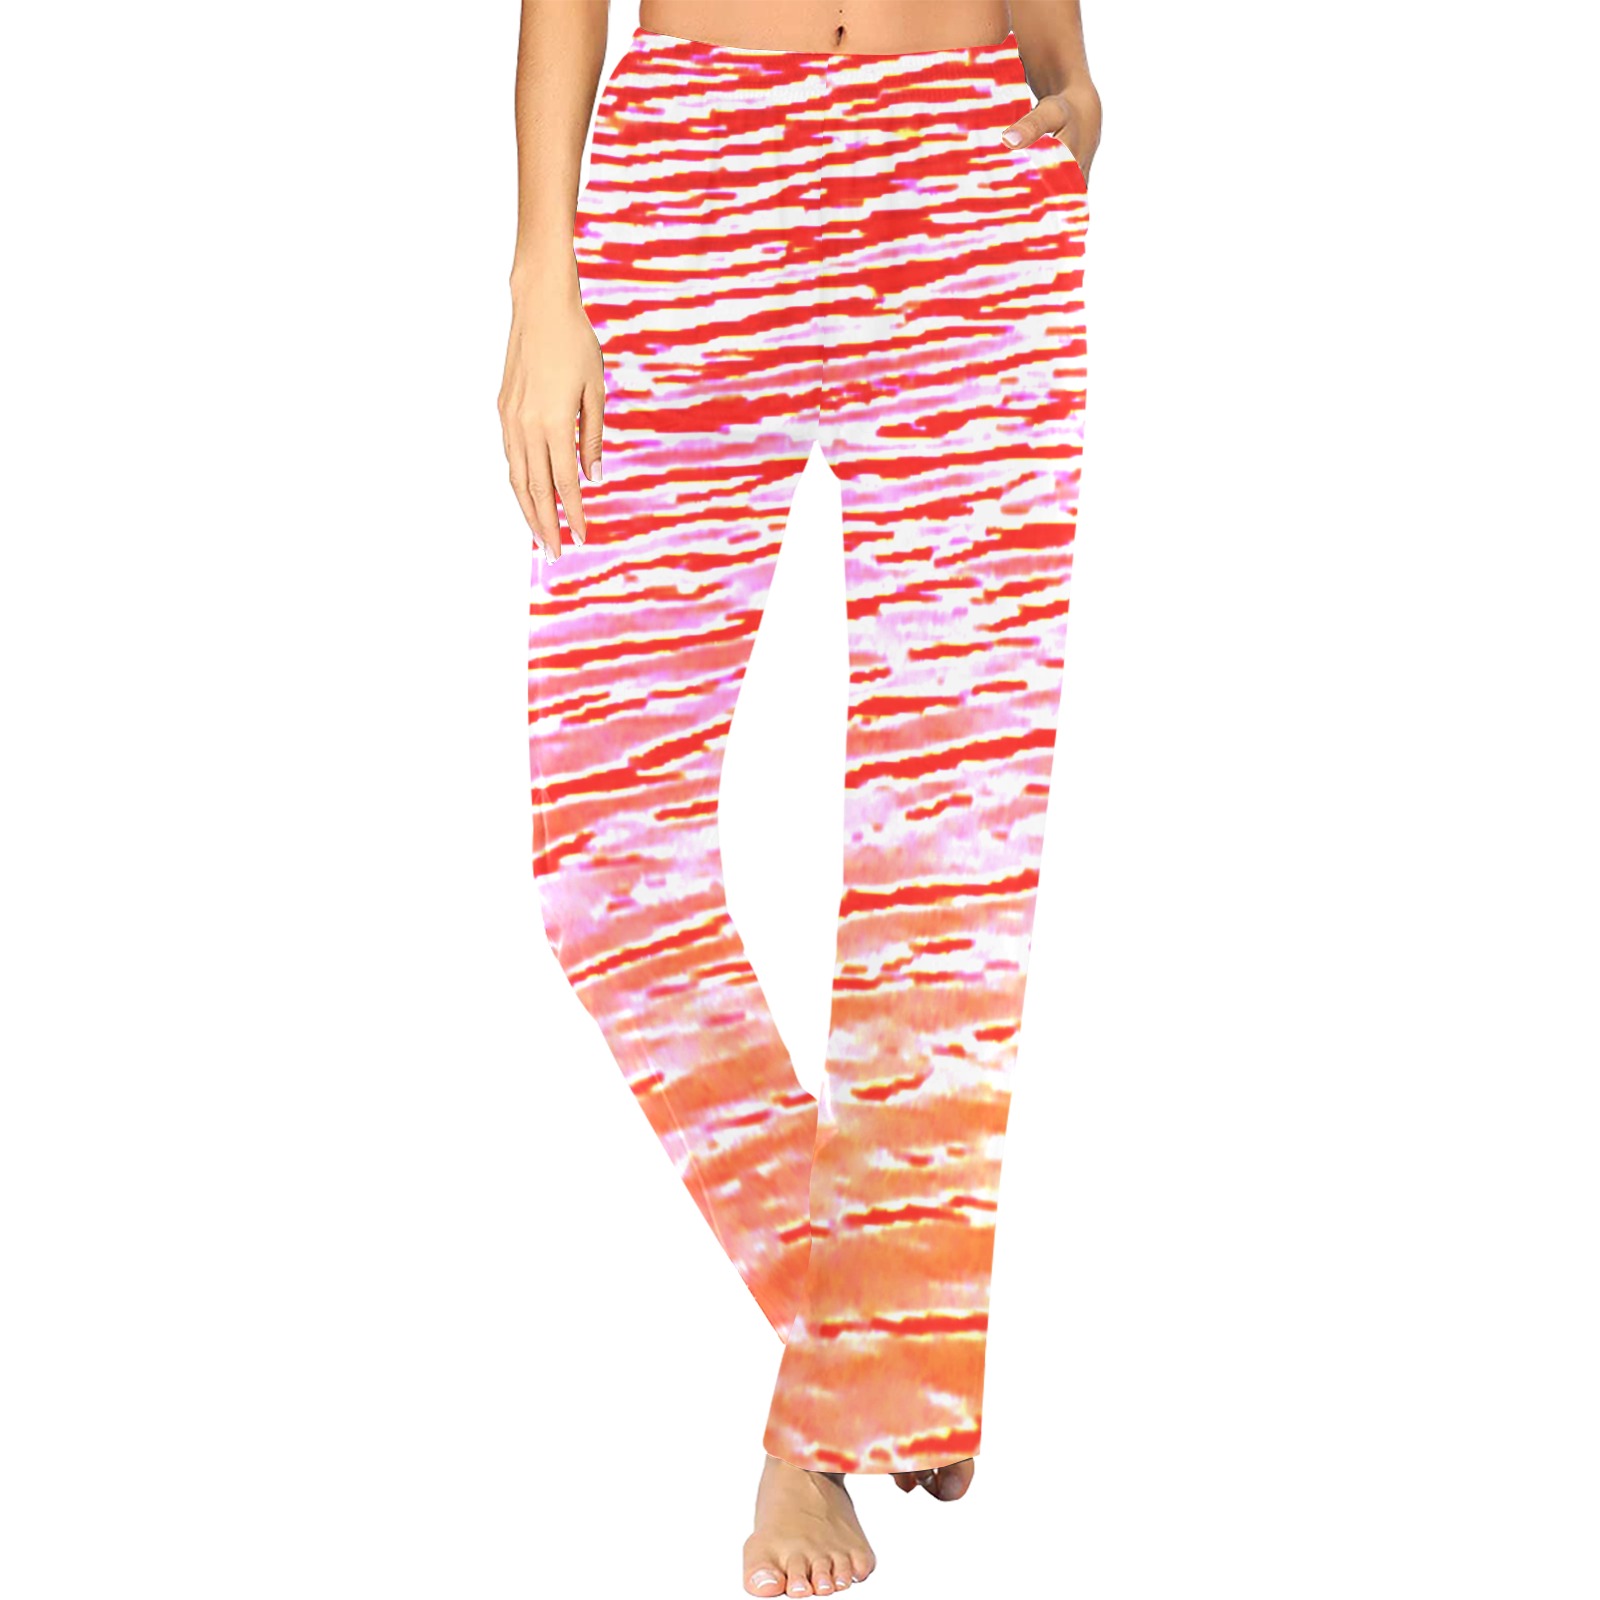 Orange and red water Women's Pajama Trousers